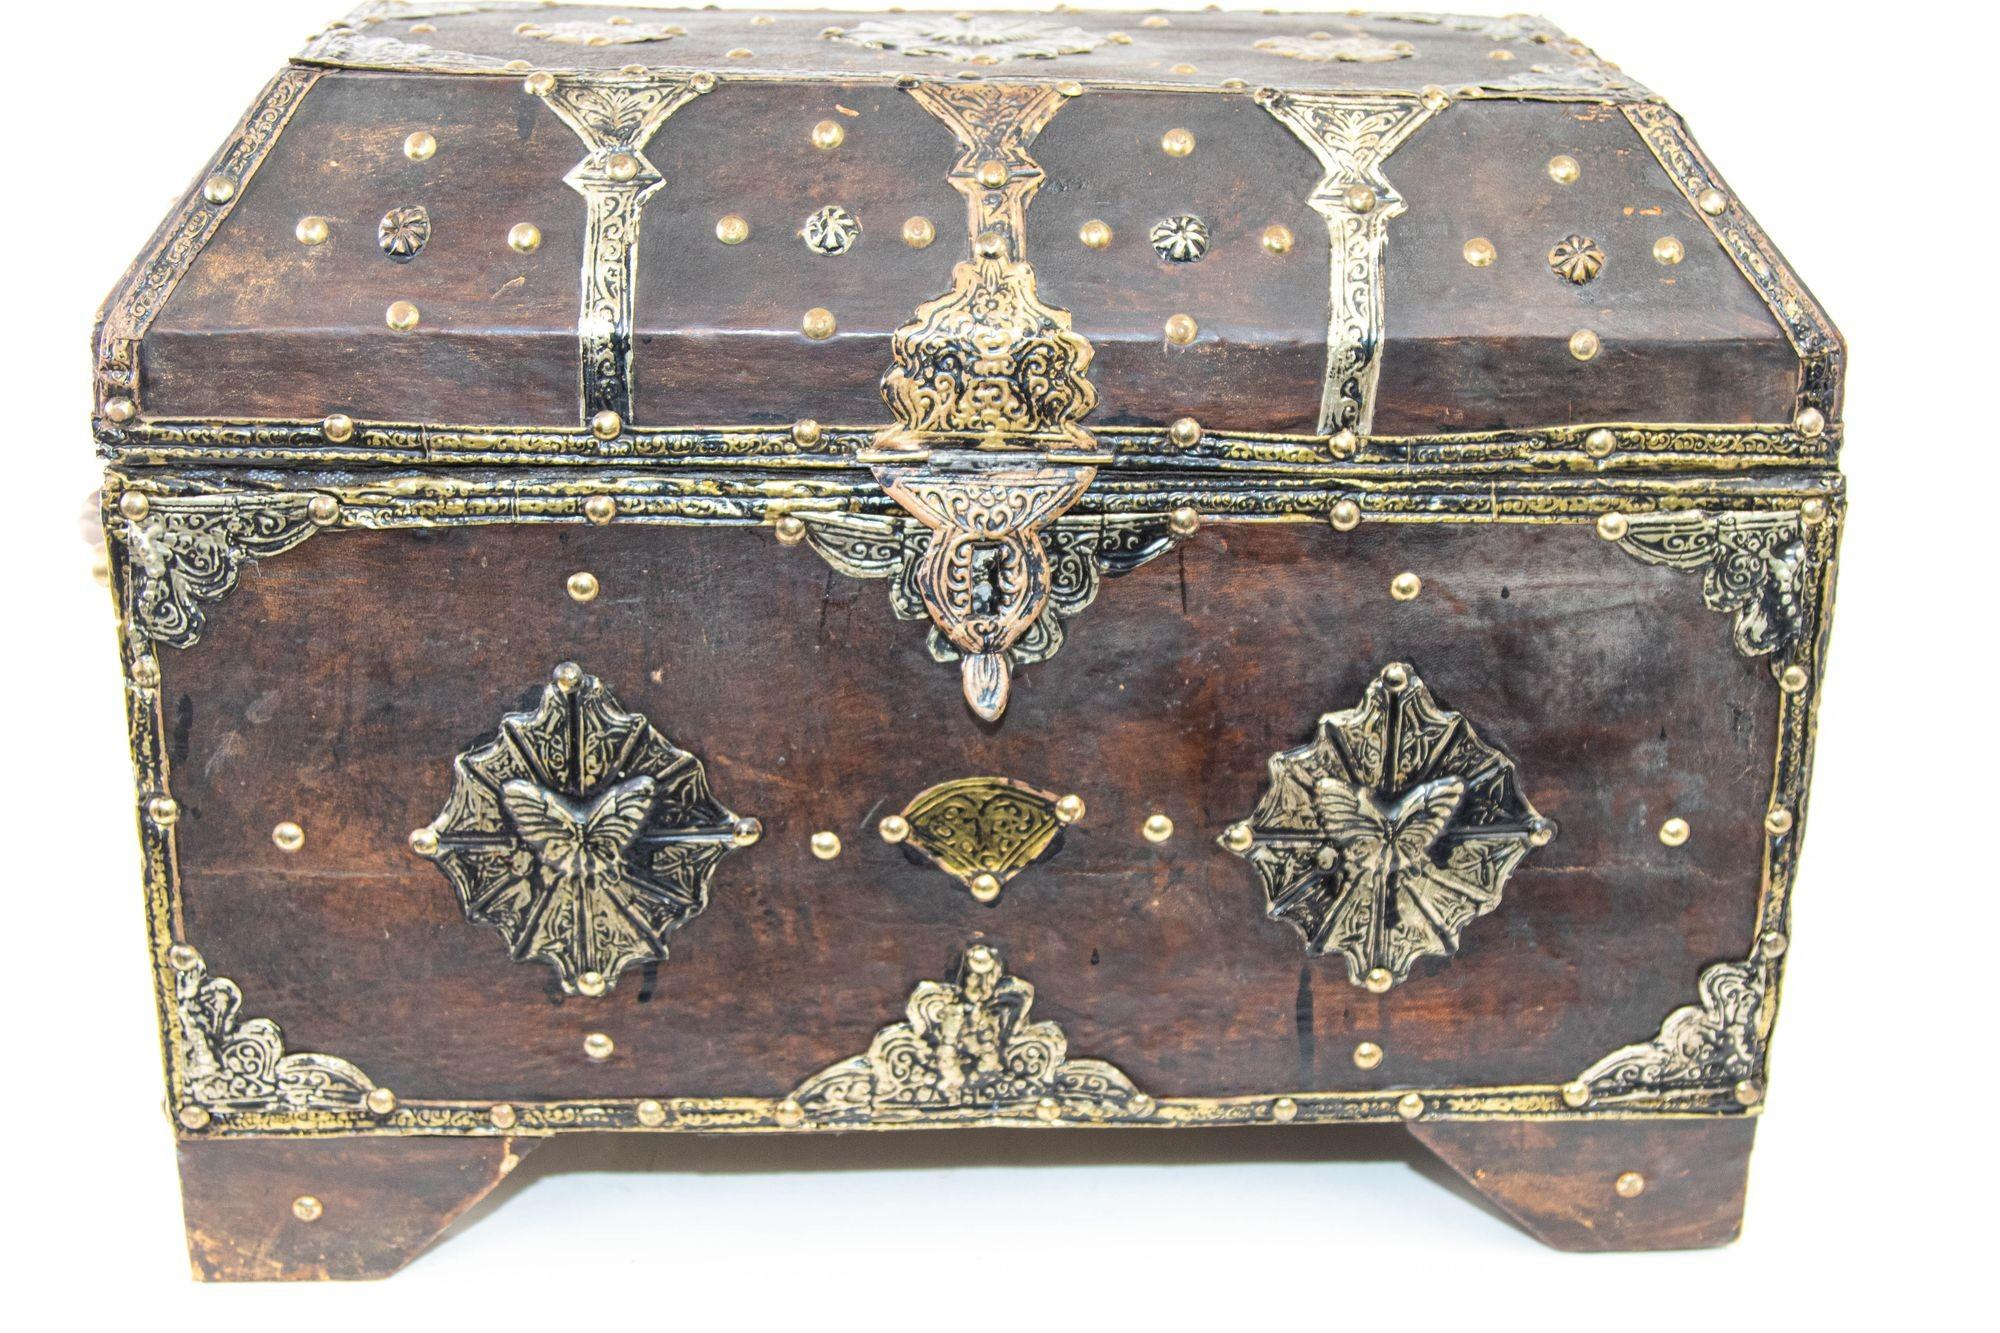 Vintage Moroccan dowry trunk with an angular dome top, the wood has been covered in leather on all sides.
Adorning the leather surface are intricate brass decorations that add a touch of opulence and visual interest. The brass designs are